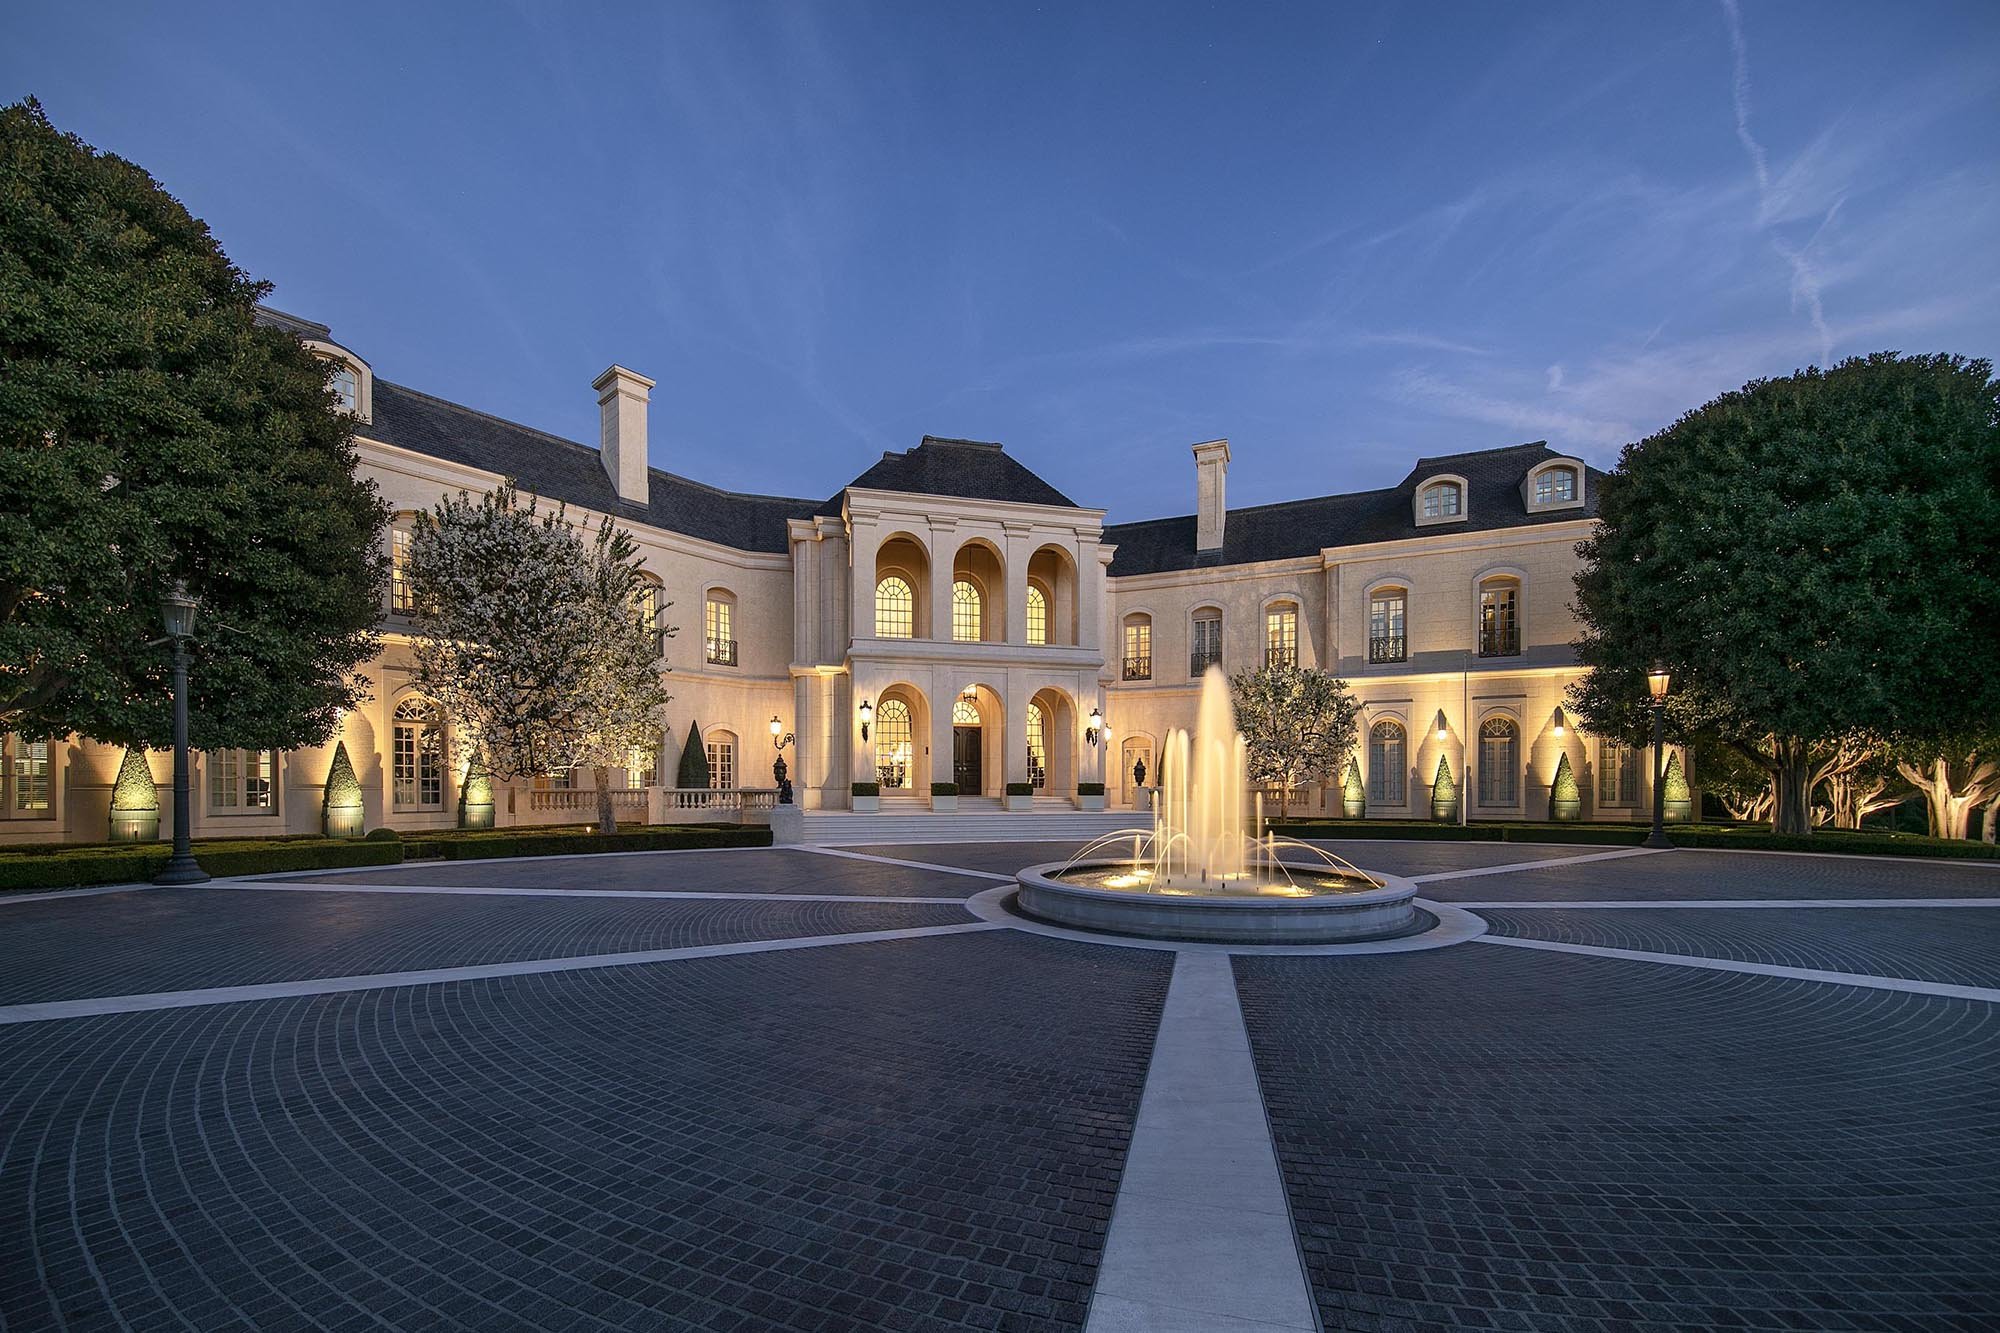 Francis York The 'Spelling Manor' is Back on the Market for $165M 1.jpg